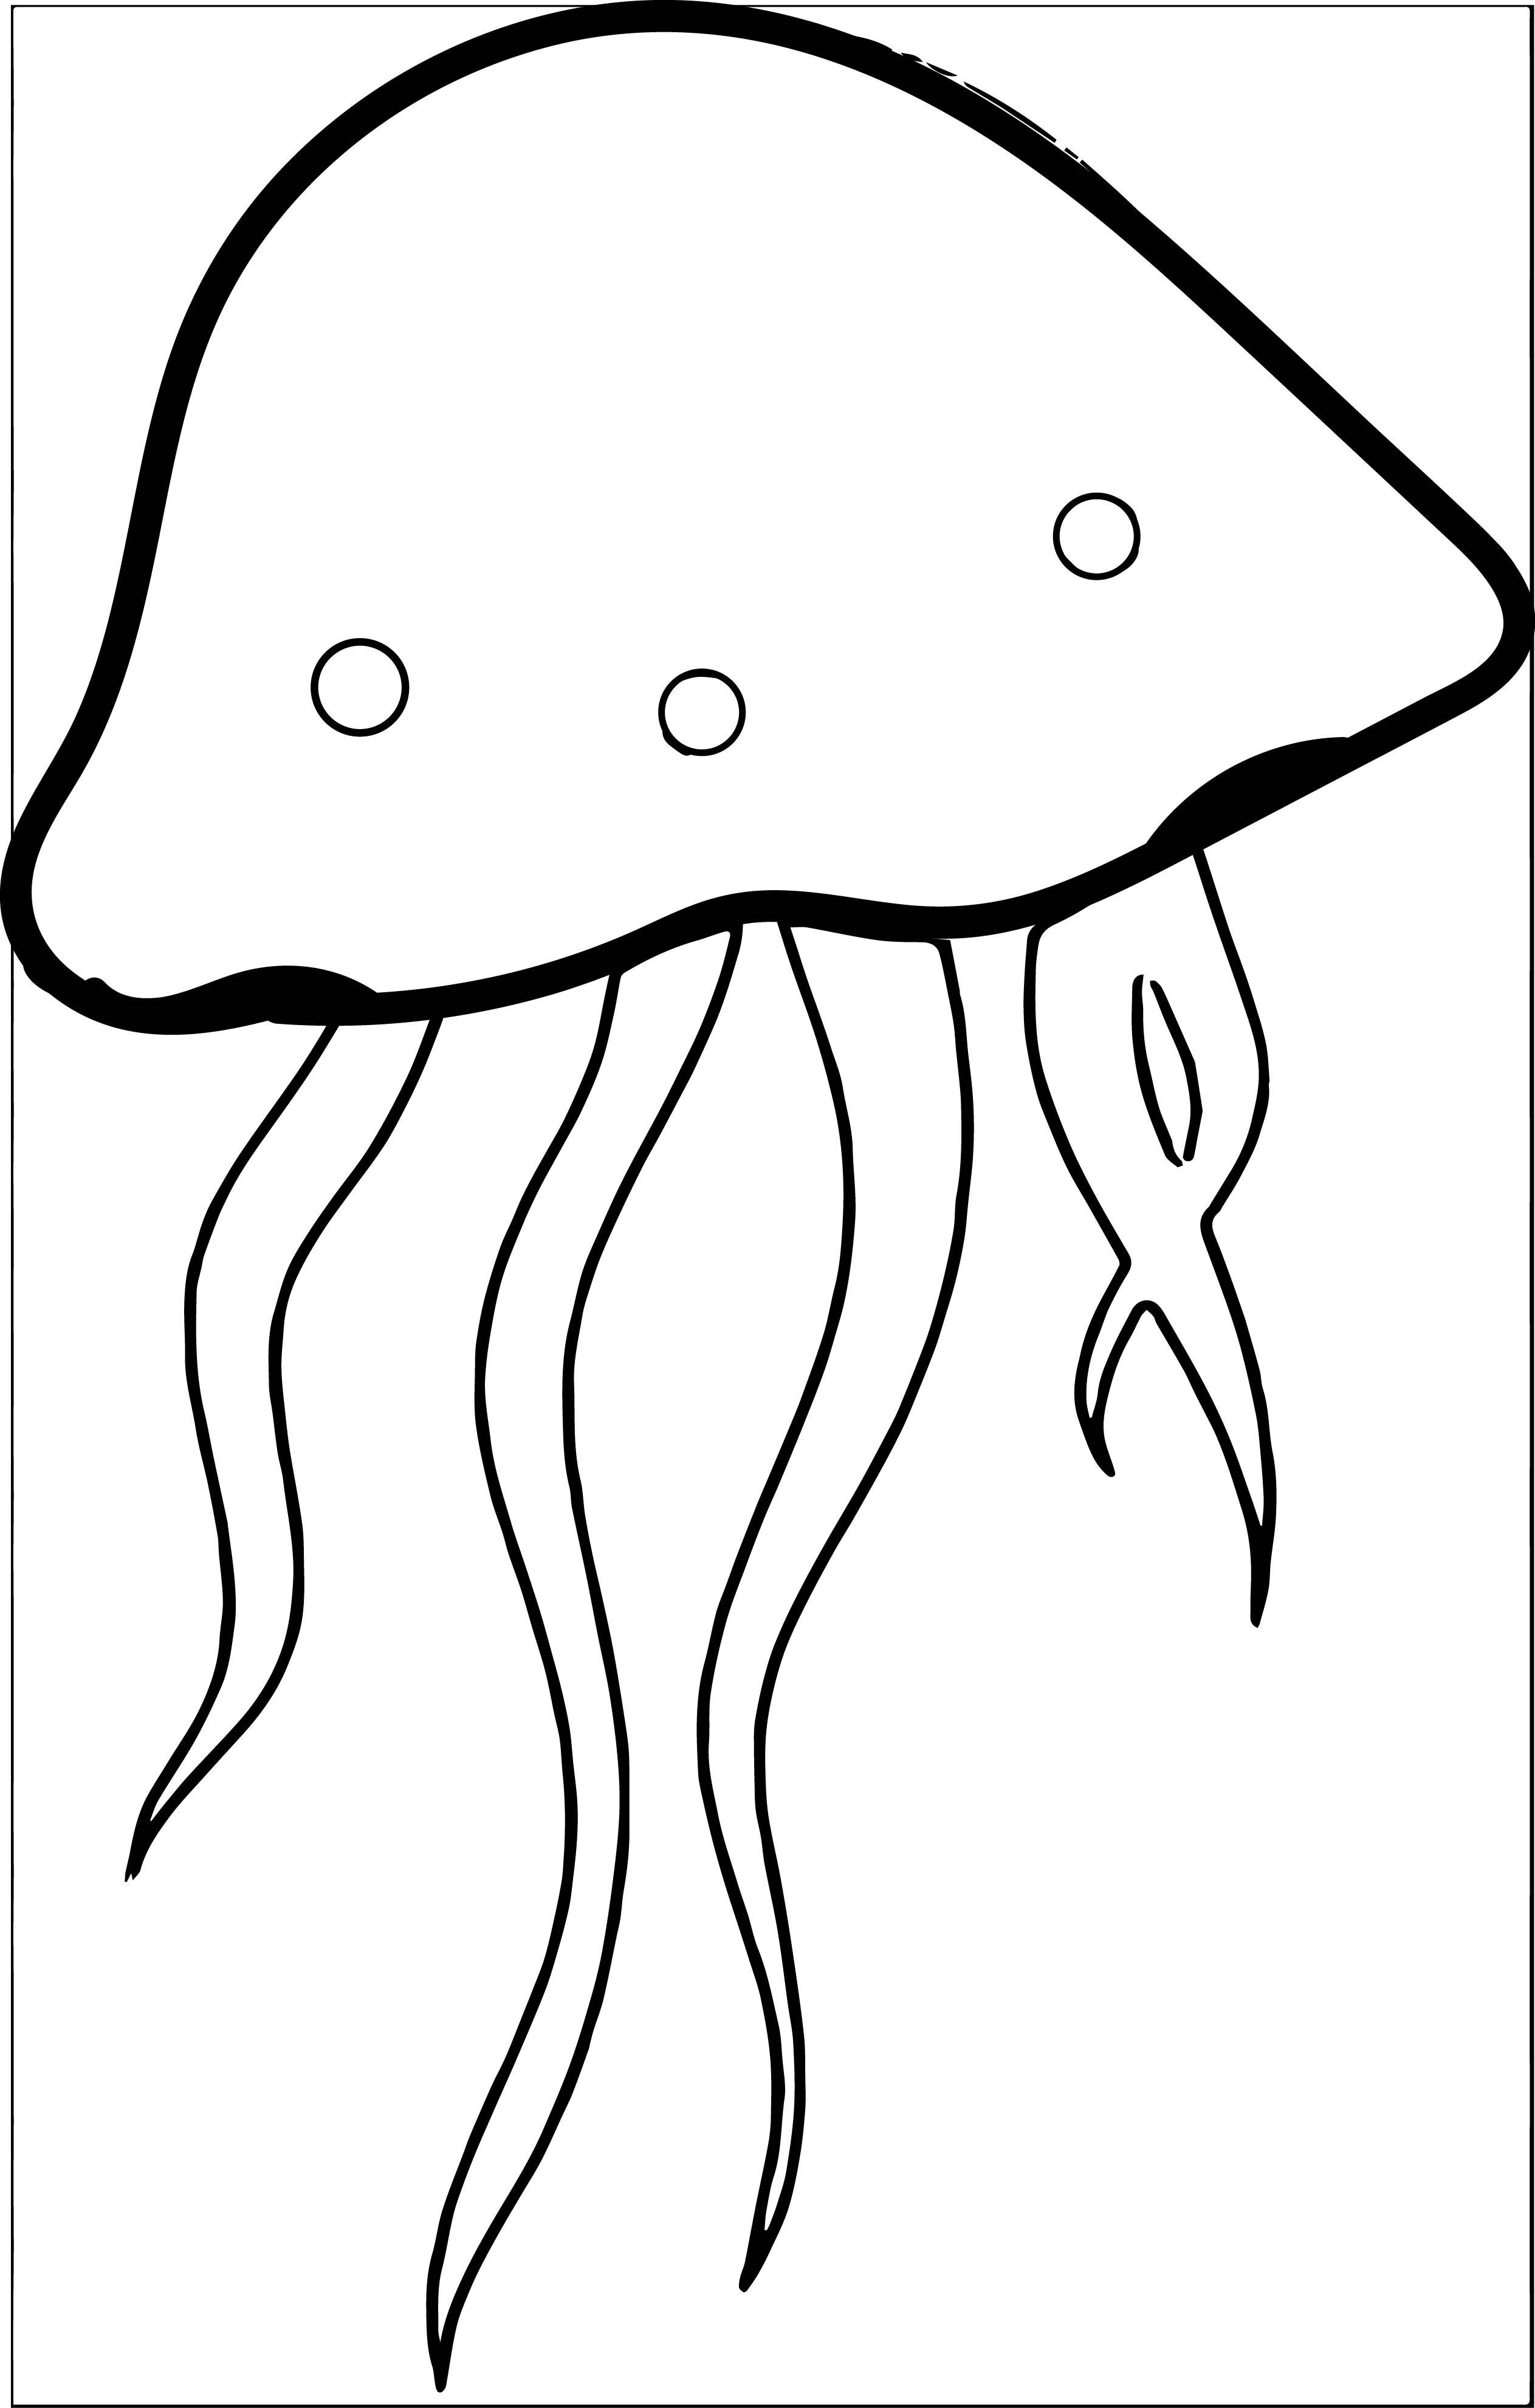 Jellyfish clipart clip art image of a jellyfish 1 5 7